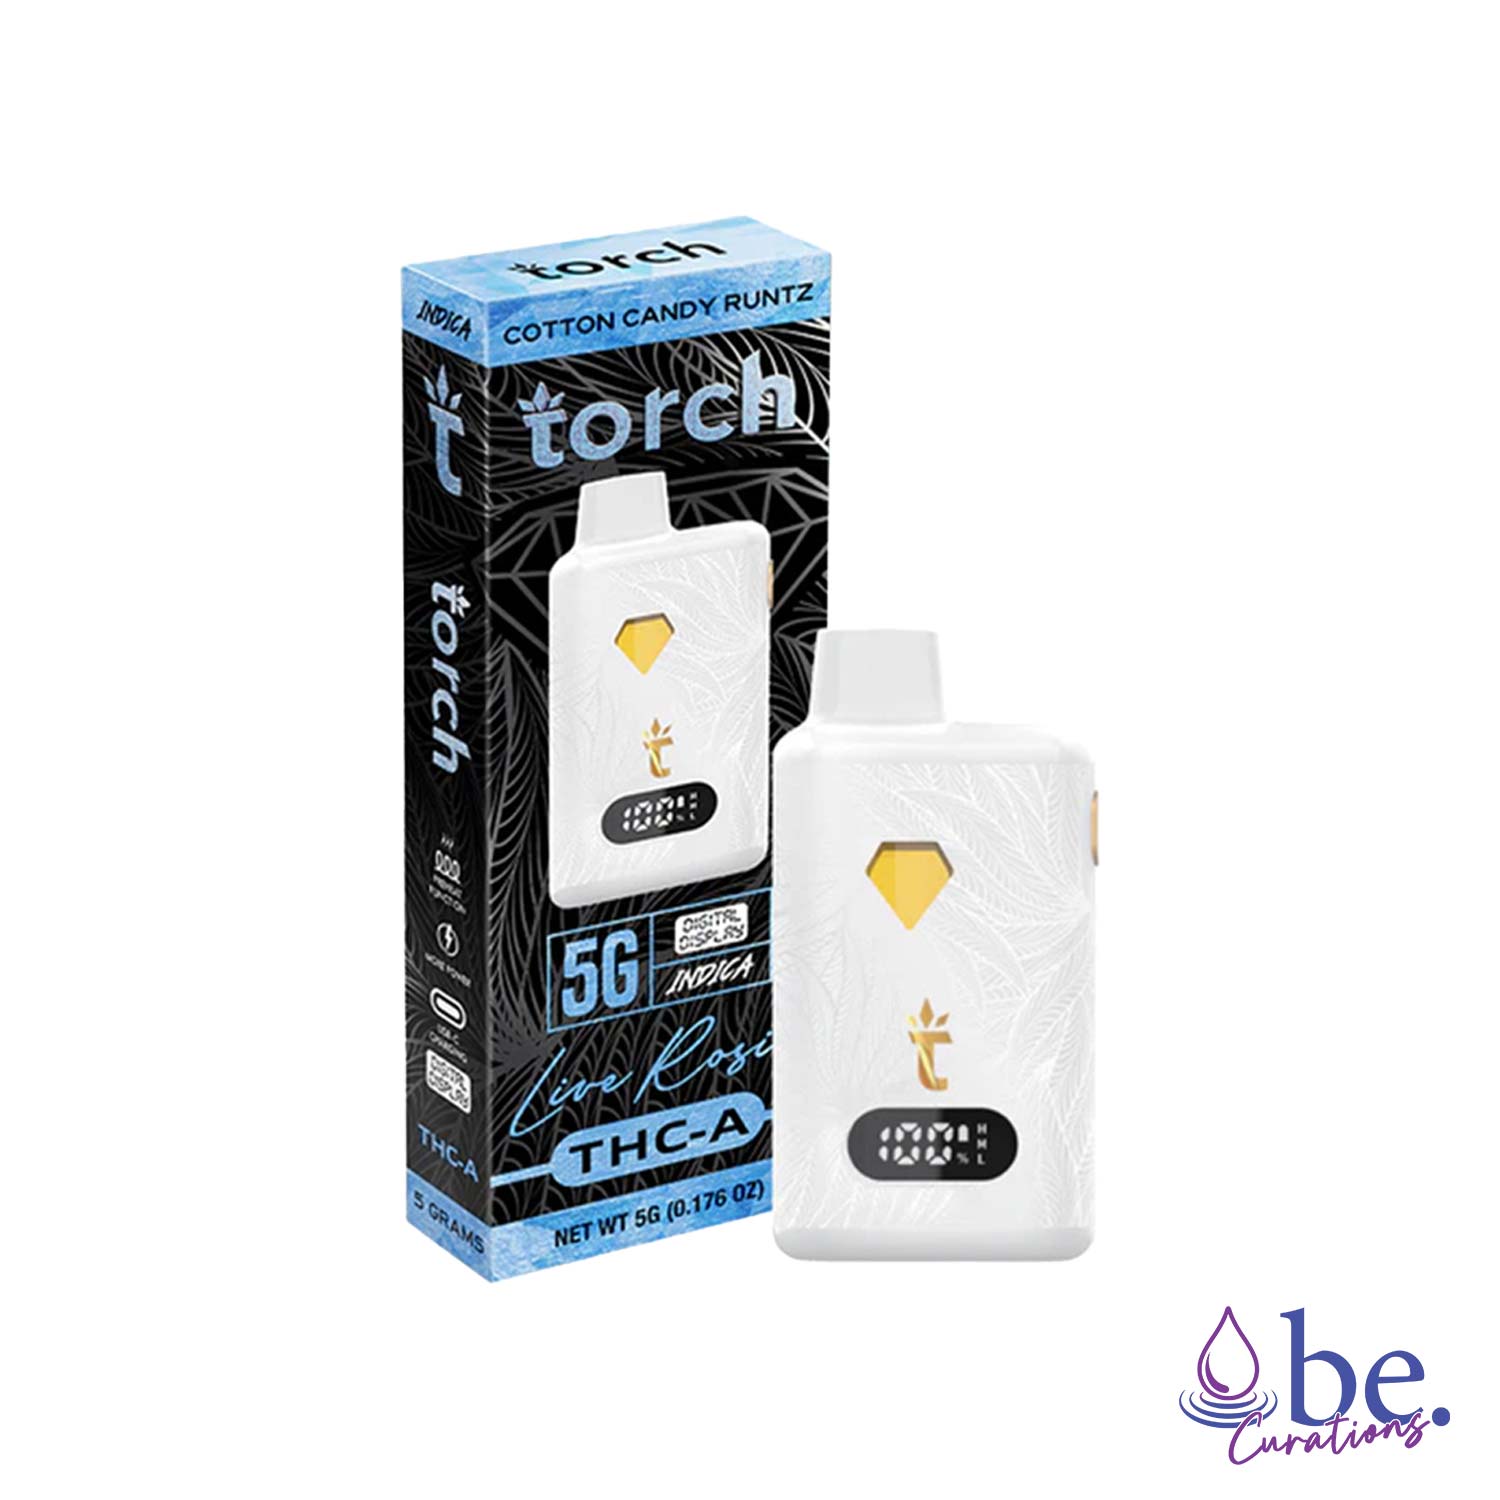 Torch Delta THC-A + Live Rosin Disposable Vape Device 5G - Cotton Candy Rutz (Indica) | Sweet flavor reminiscent of cotton candy, complemented by fruity notes. | be.Curations